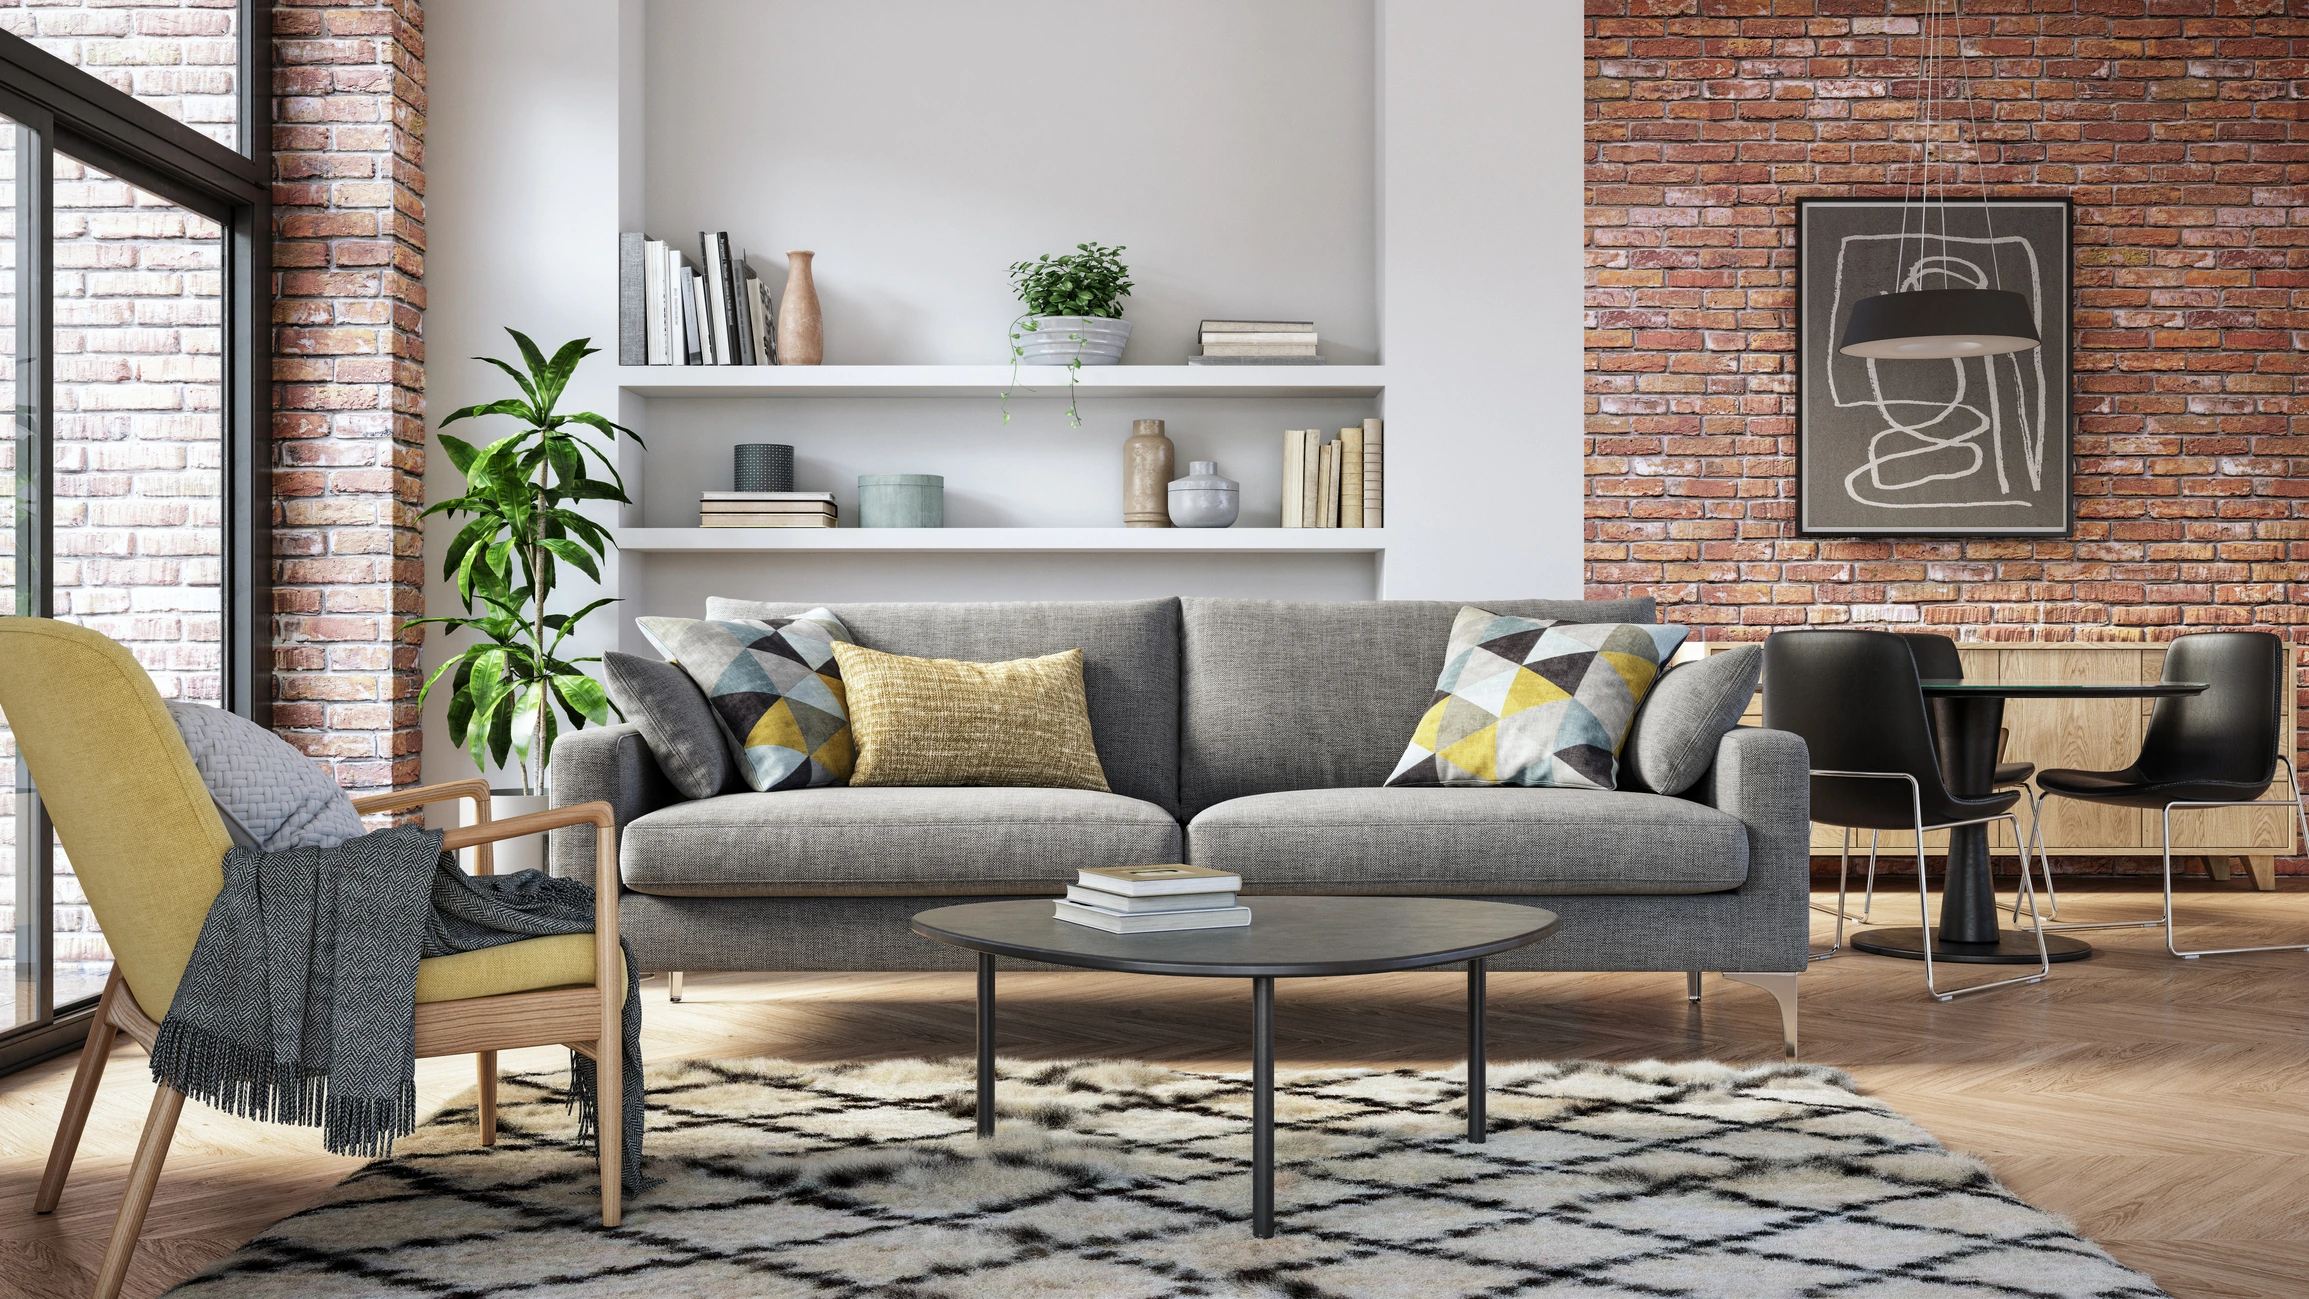 3 Living Room Ideas to Lift Your Home